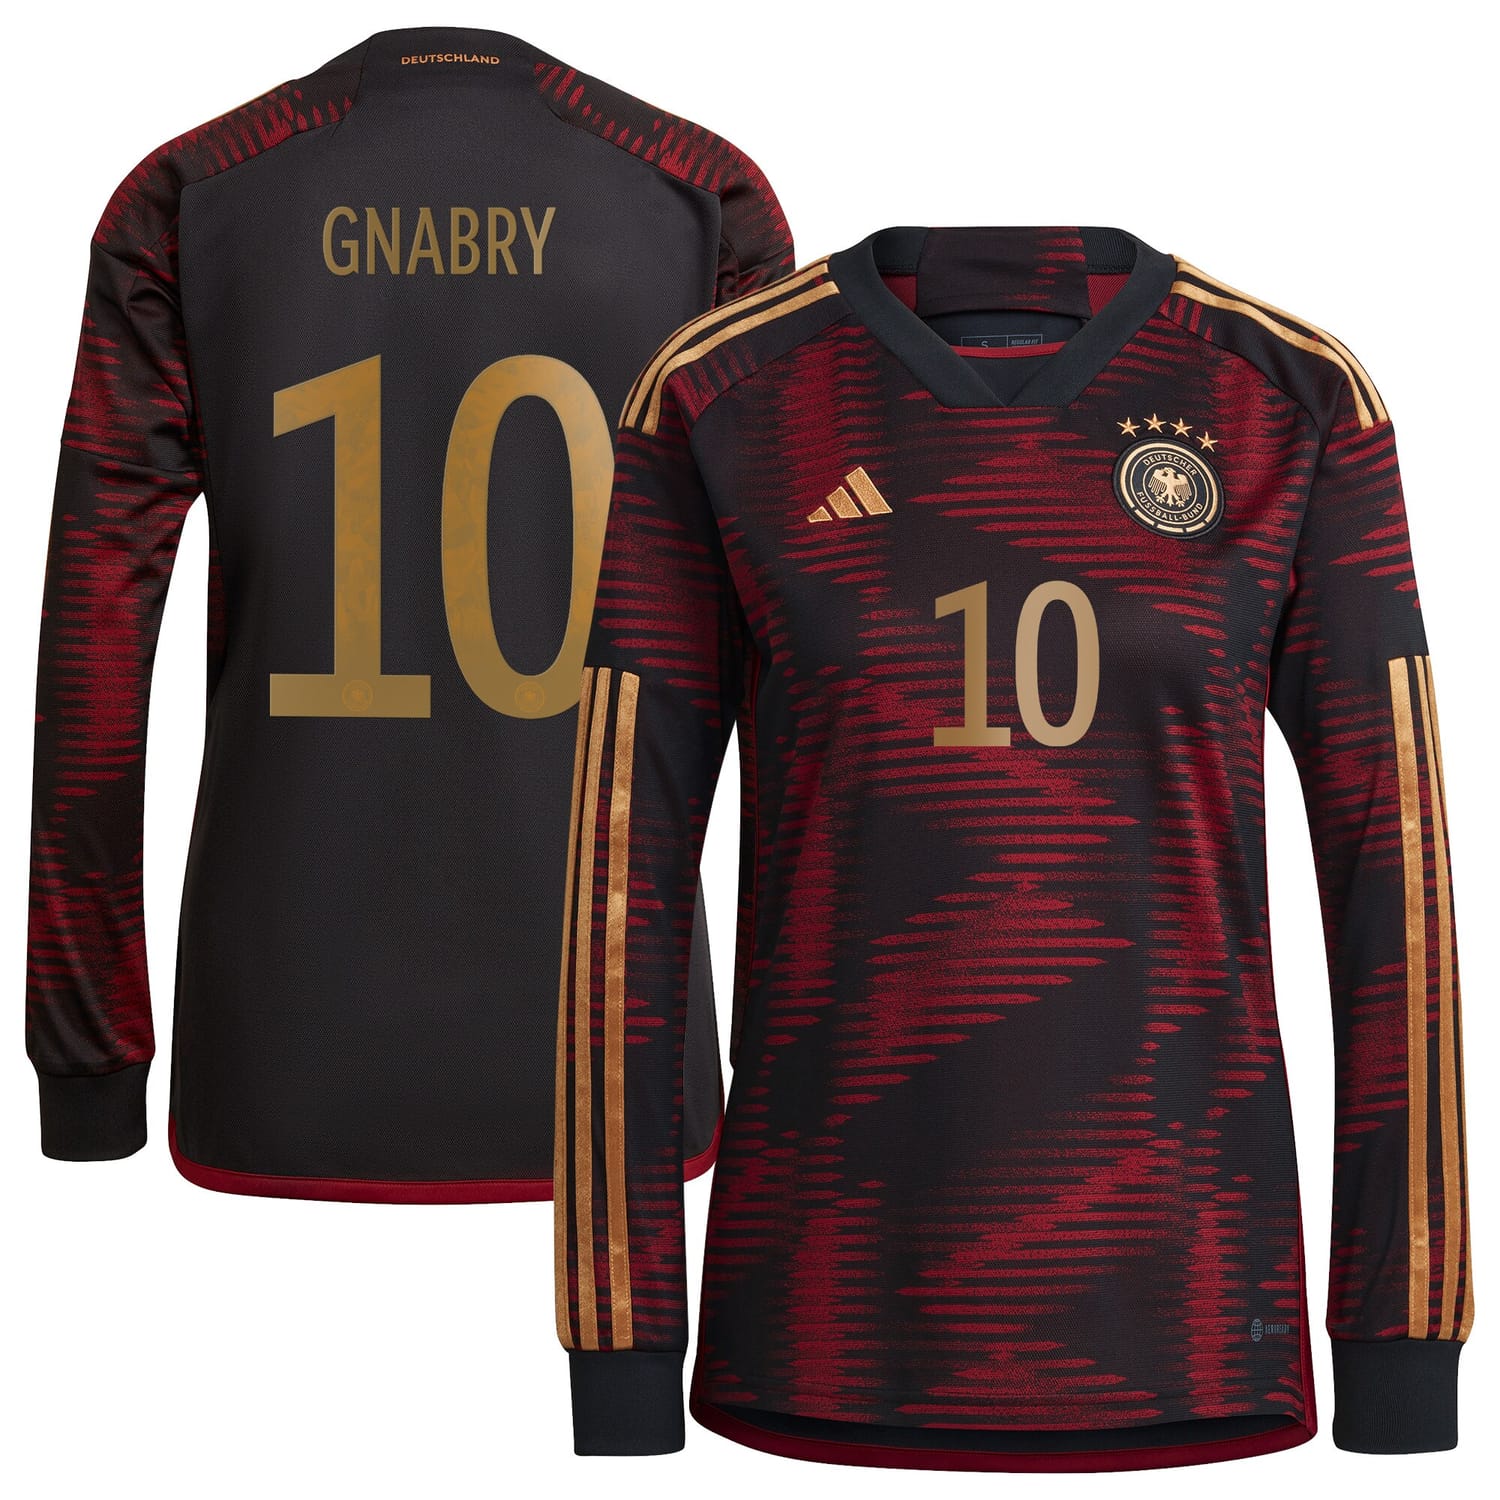 Germany National Team Away Jersey Shirt Long Sleeve player Serge Gnabry 10 printing for Women